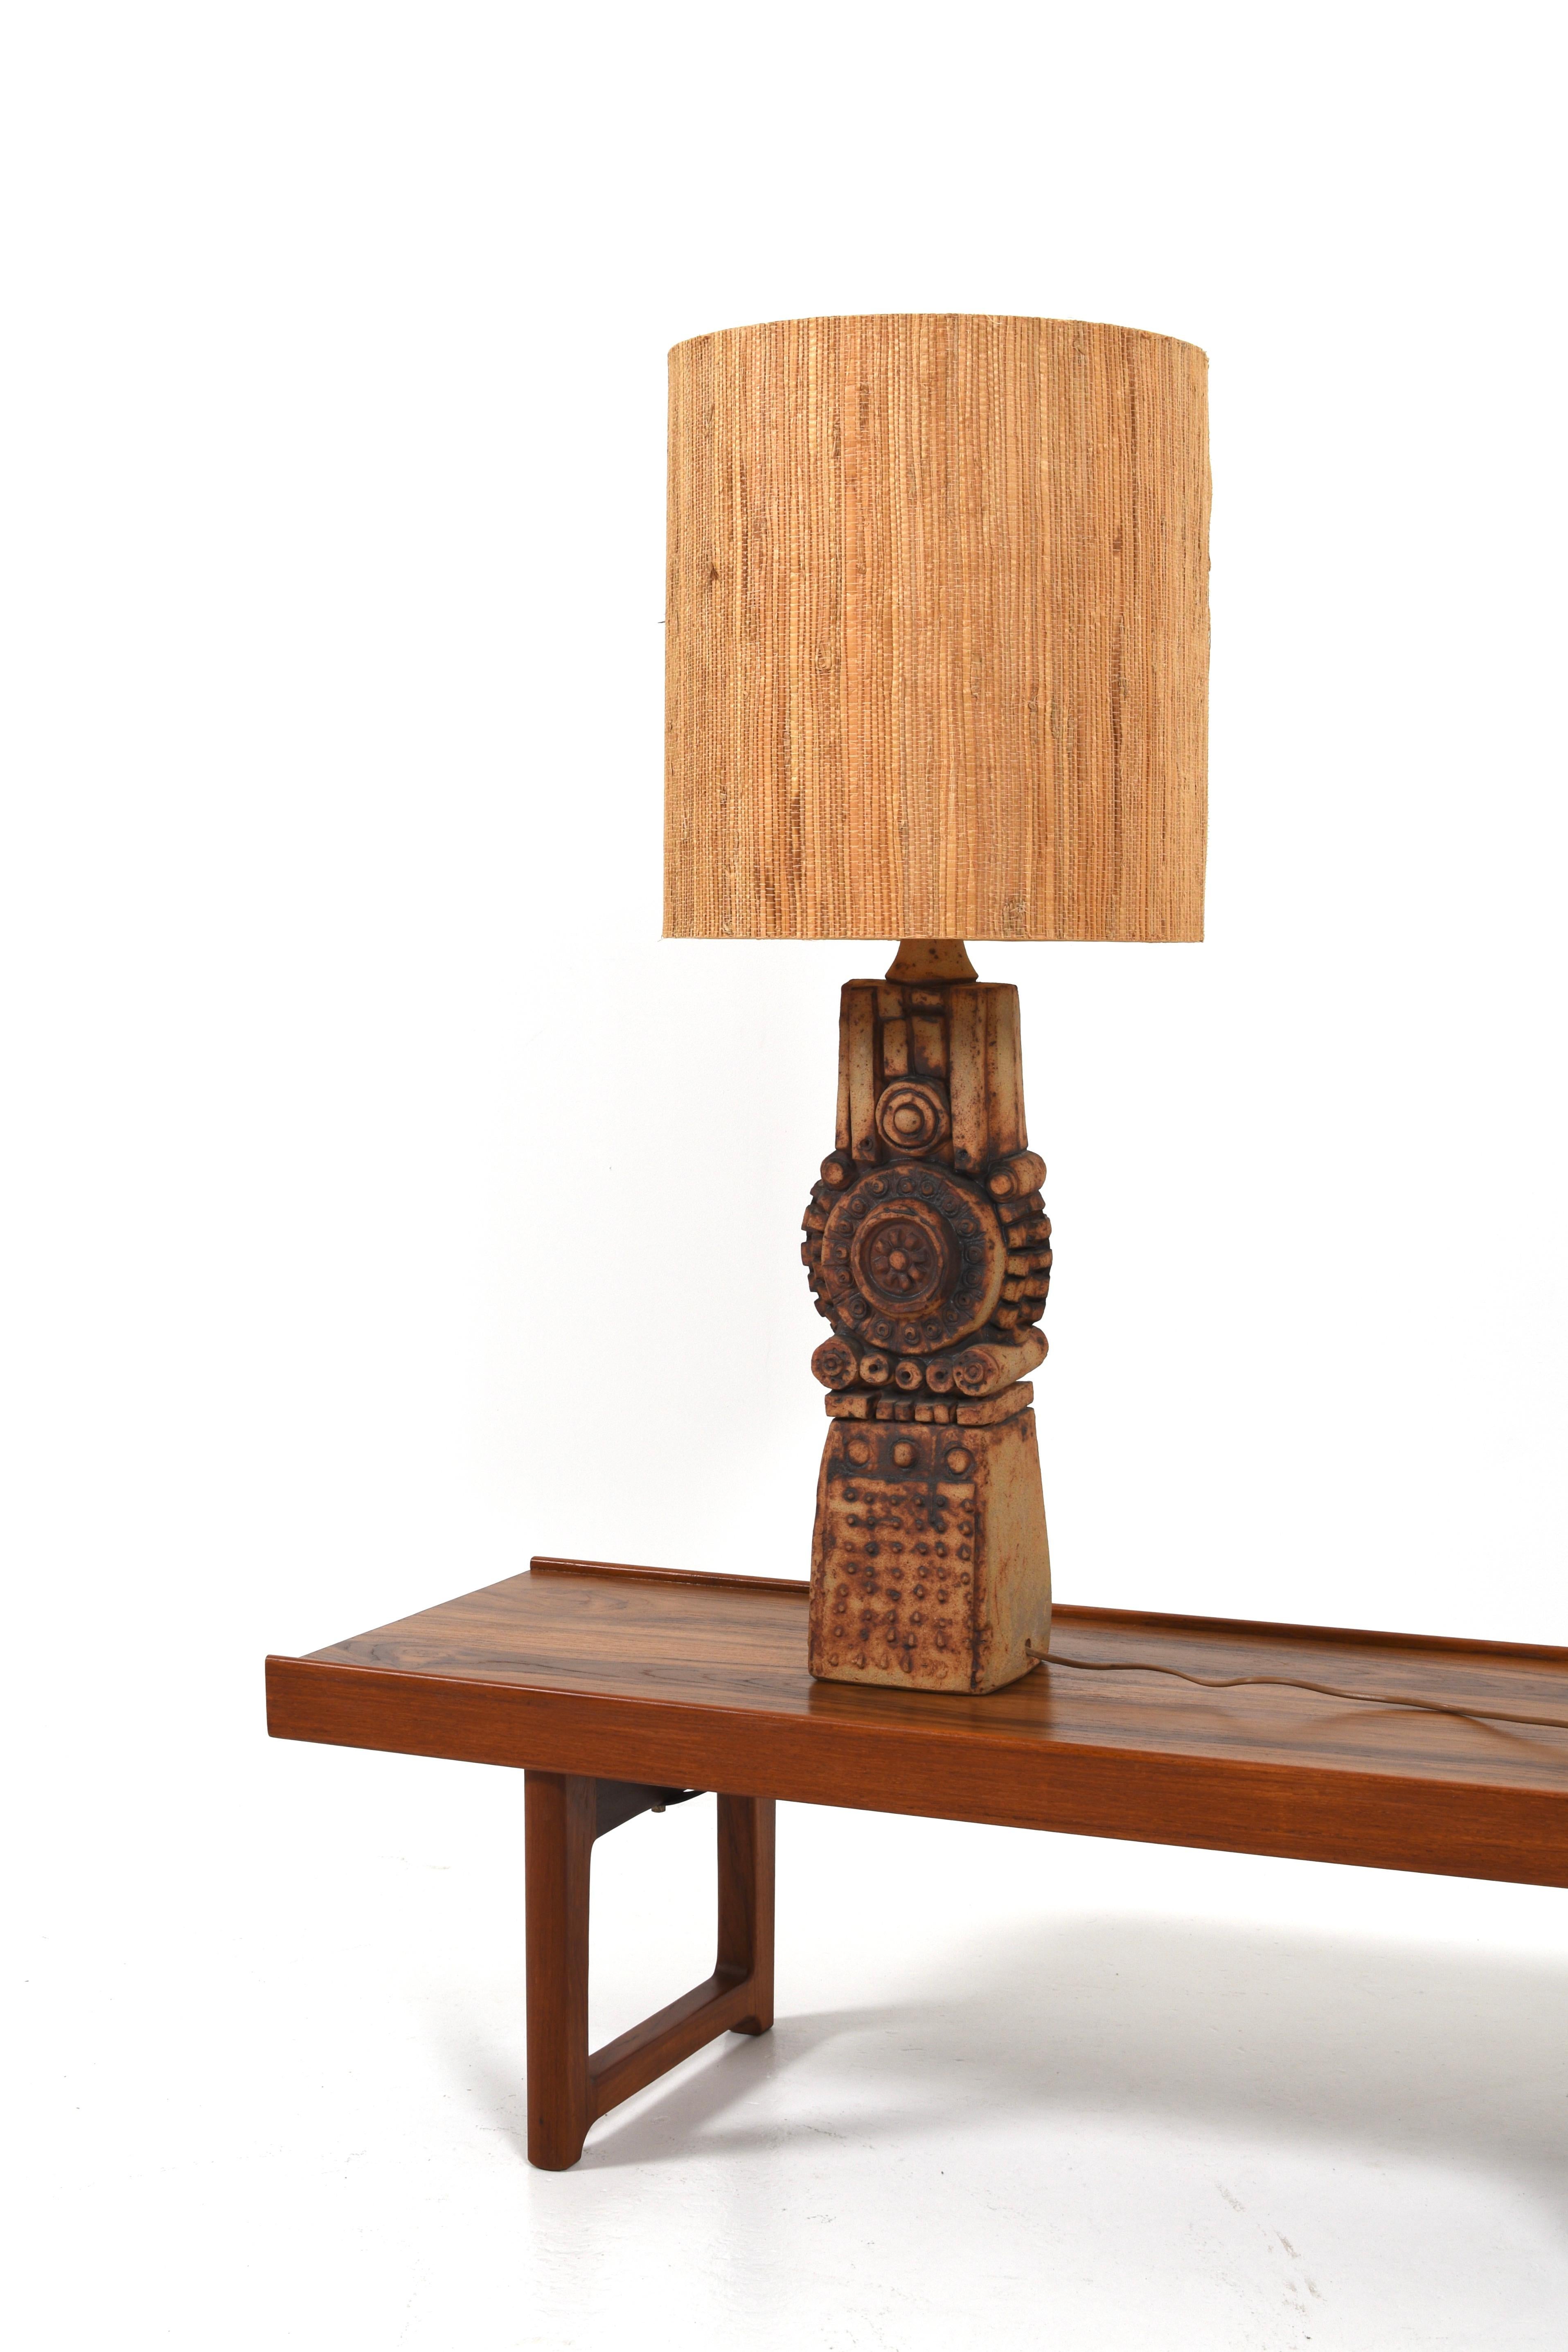 Totem Table Lamp by Bernard Rooke with rattan lampshade, 1970s For Sale 1